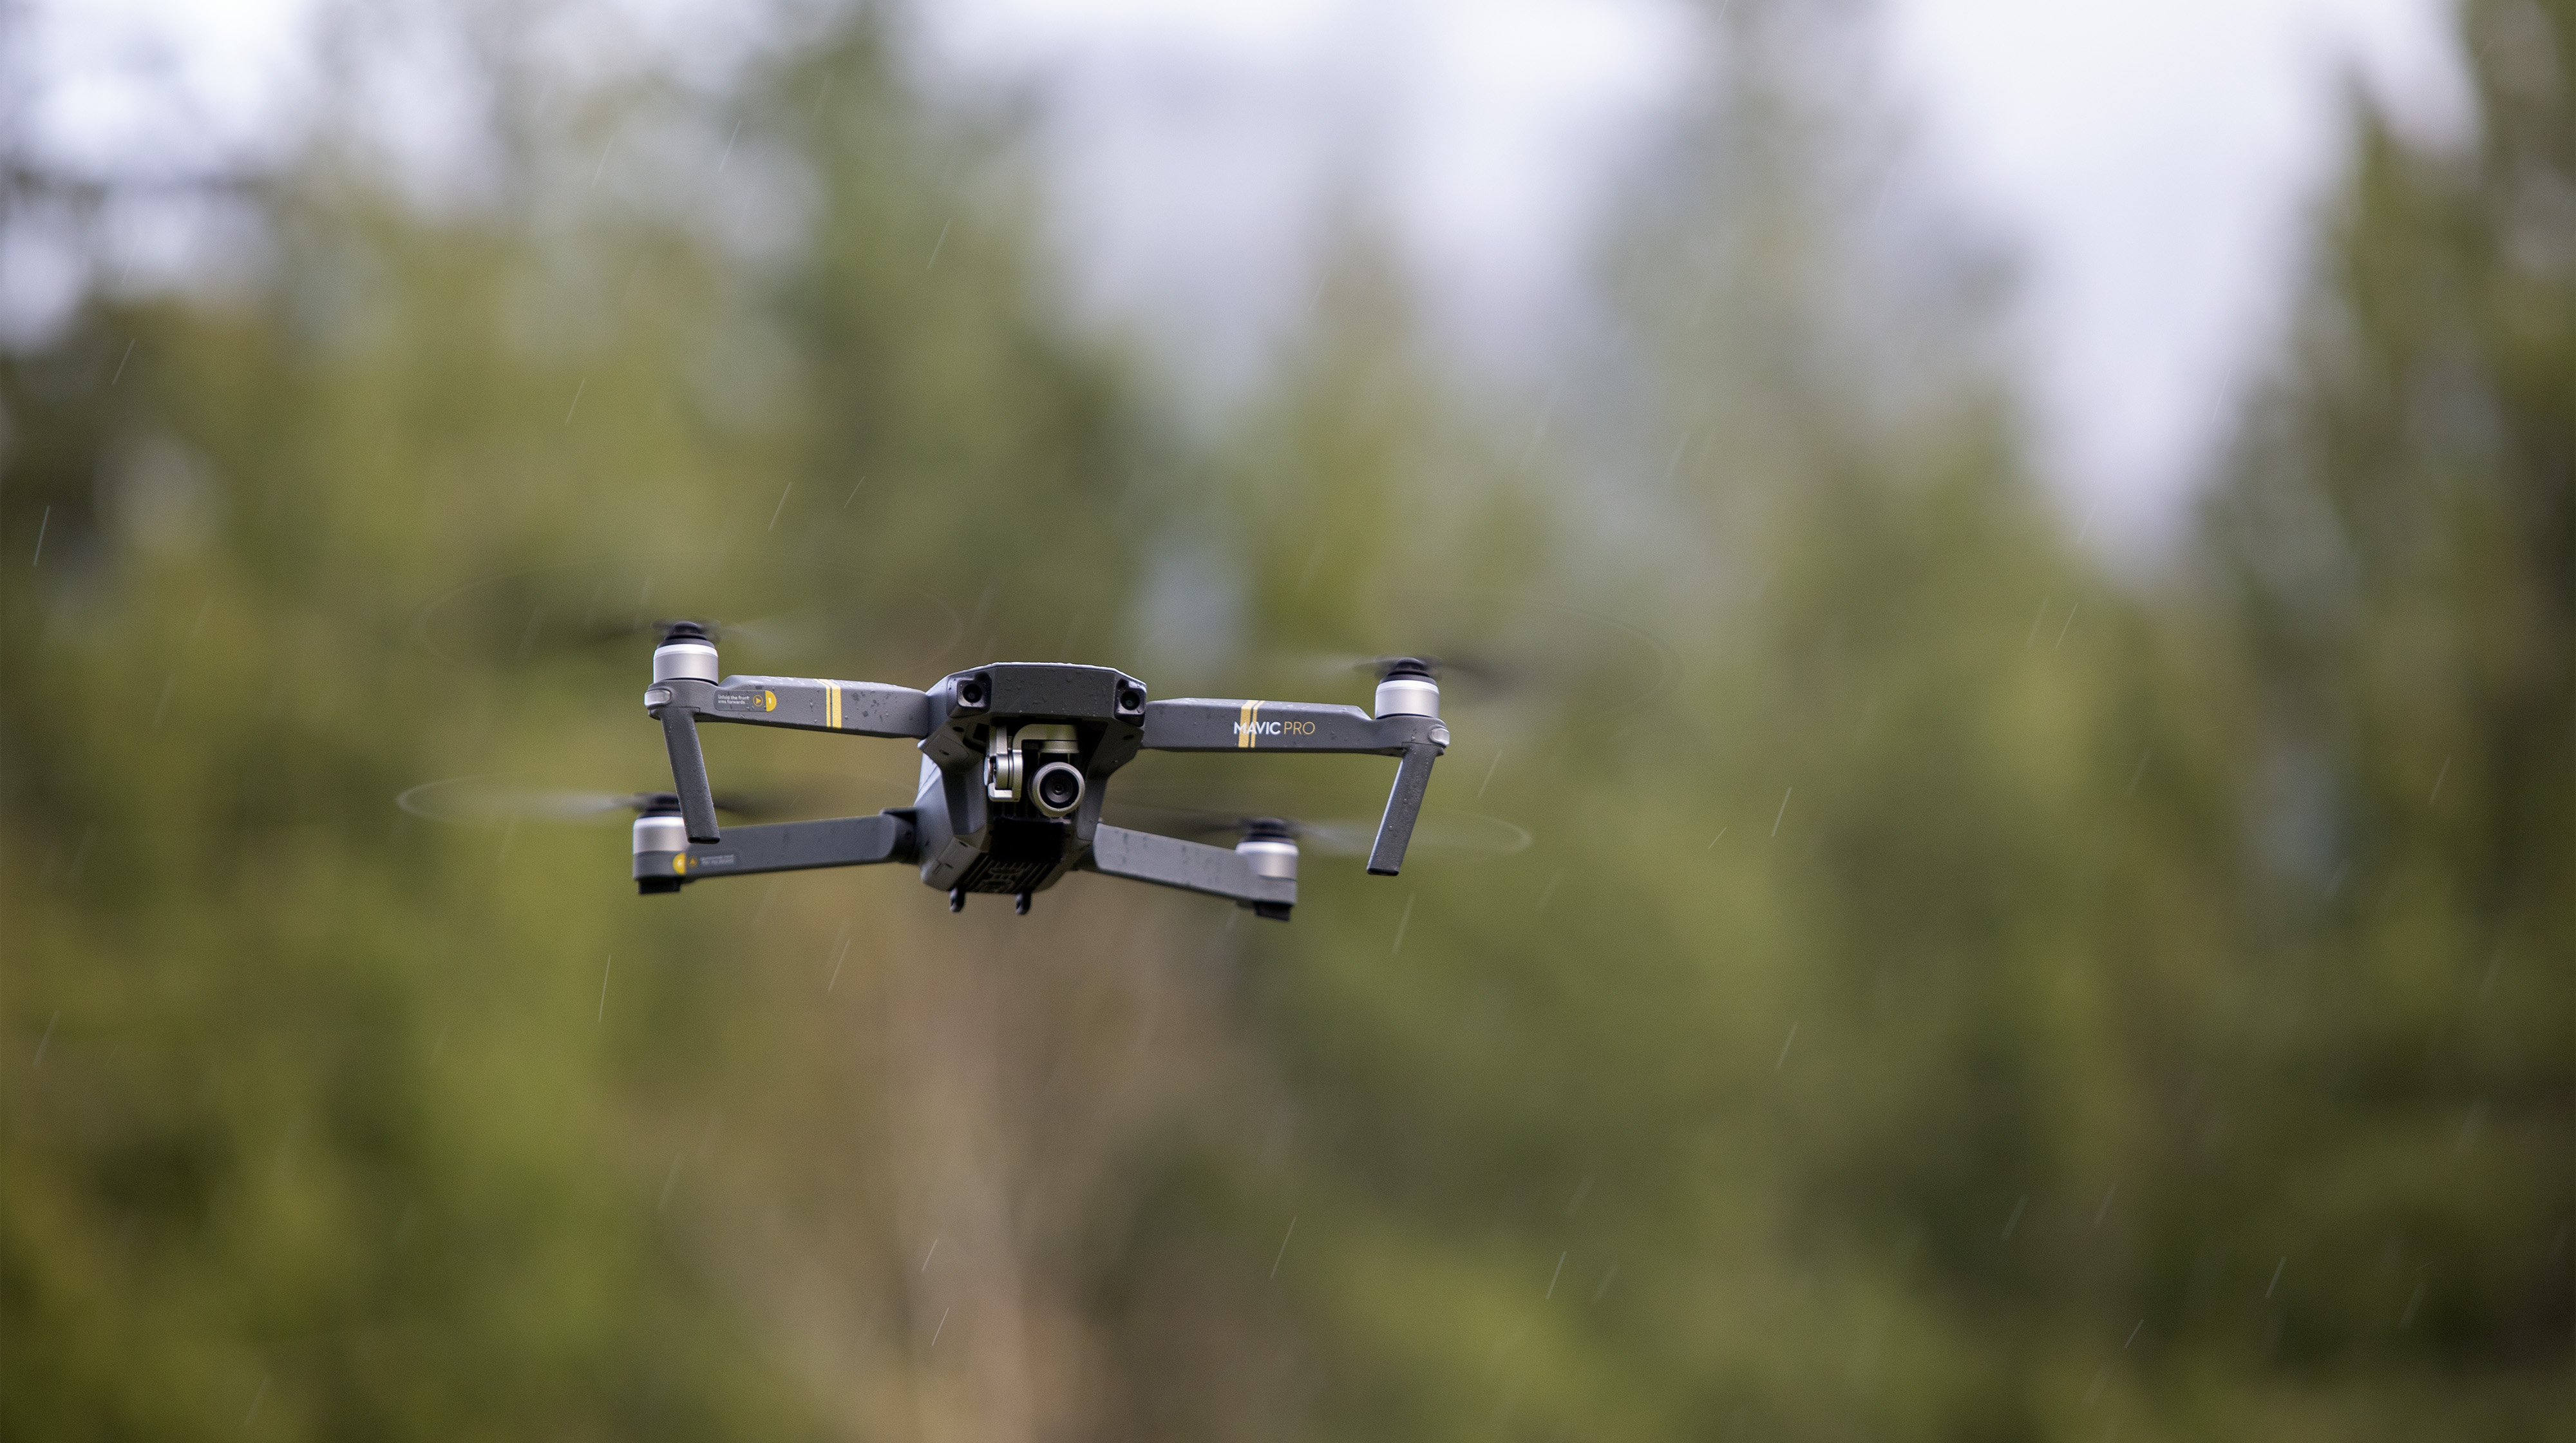 New findings shed light on drone encounters